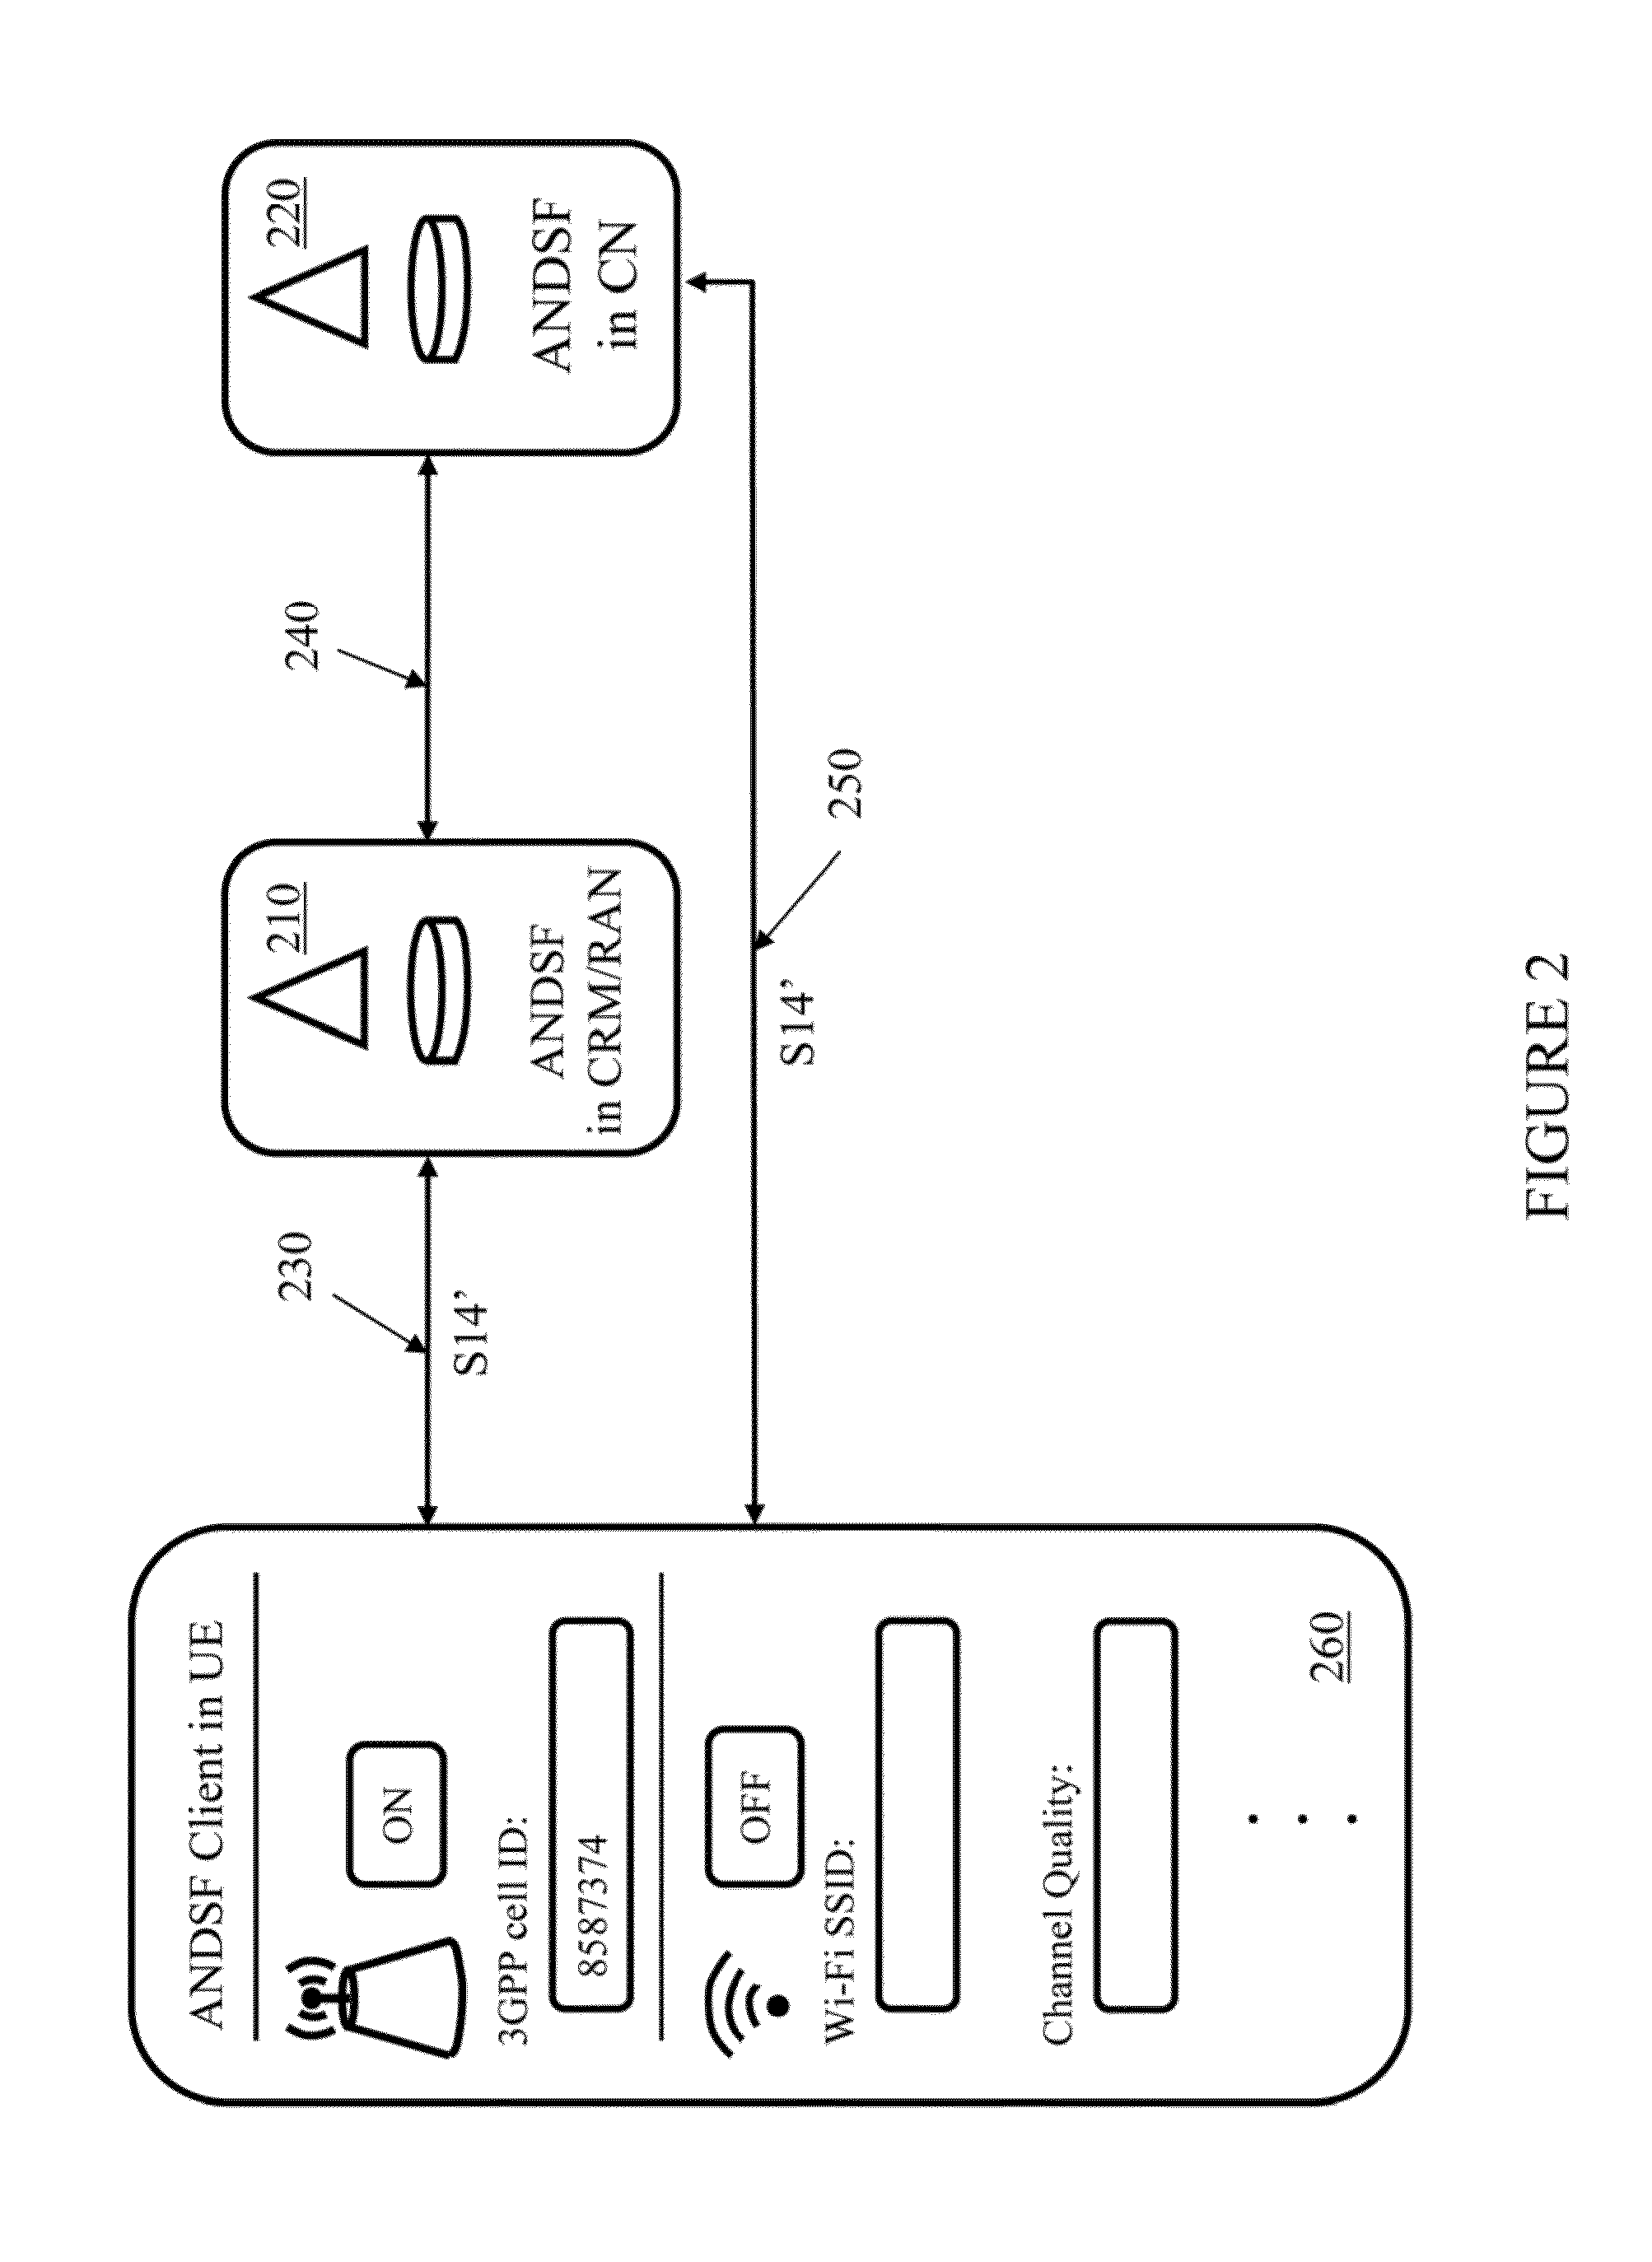 Distributed access network discovery and selection function and method of operating the same